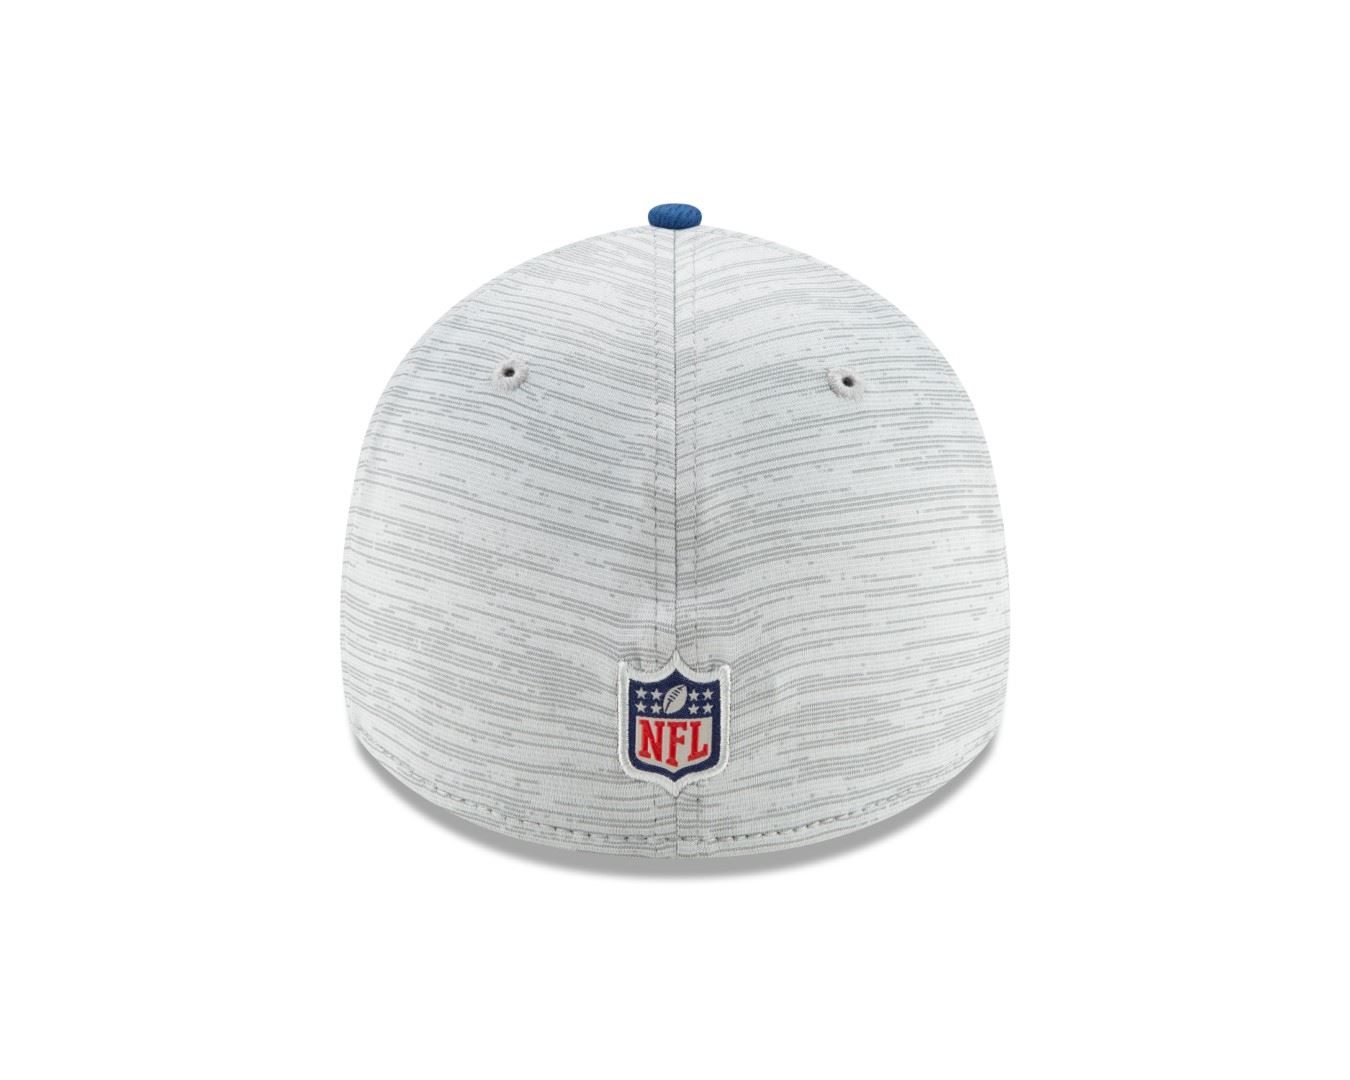 Indianapolis Colts NFL Training 2021 Grey 39Thirty Stretch Cap New Era